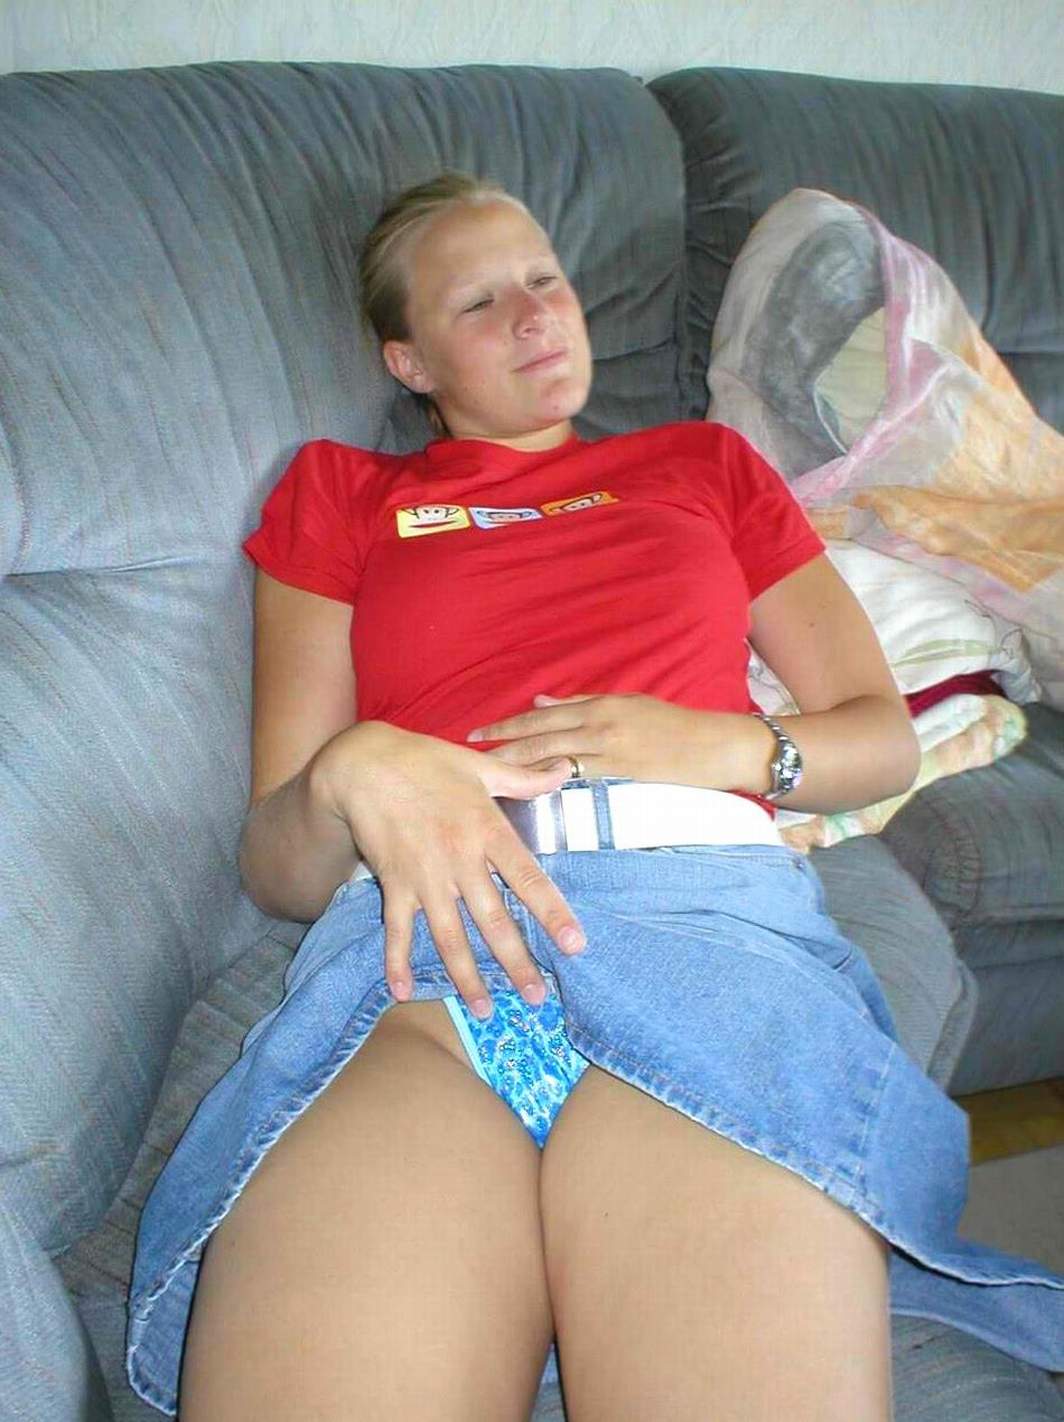 Amateur homemade Porn very hot archive FREE image pic